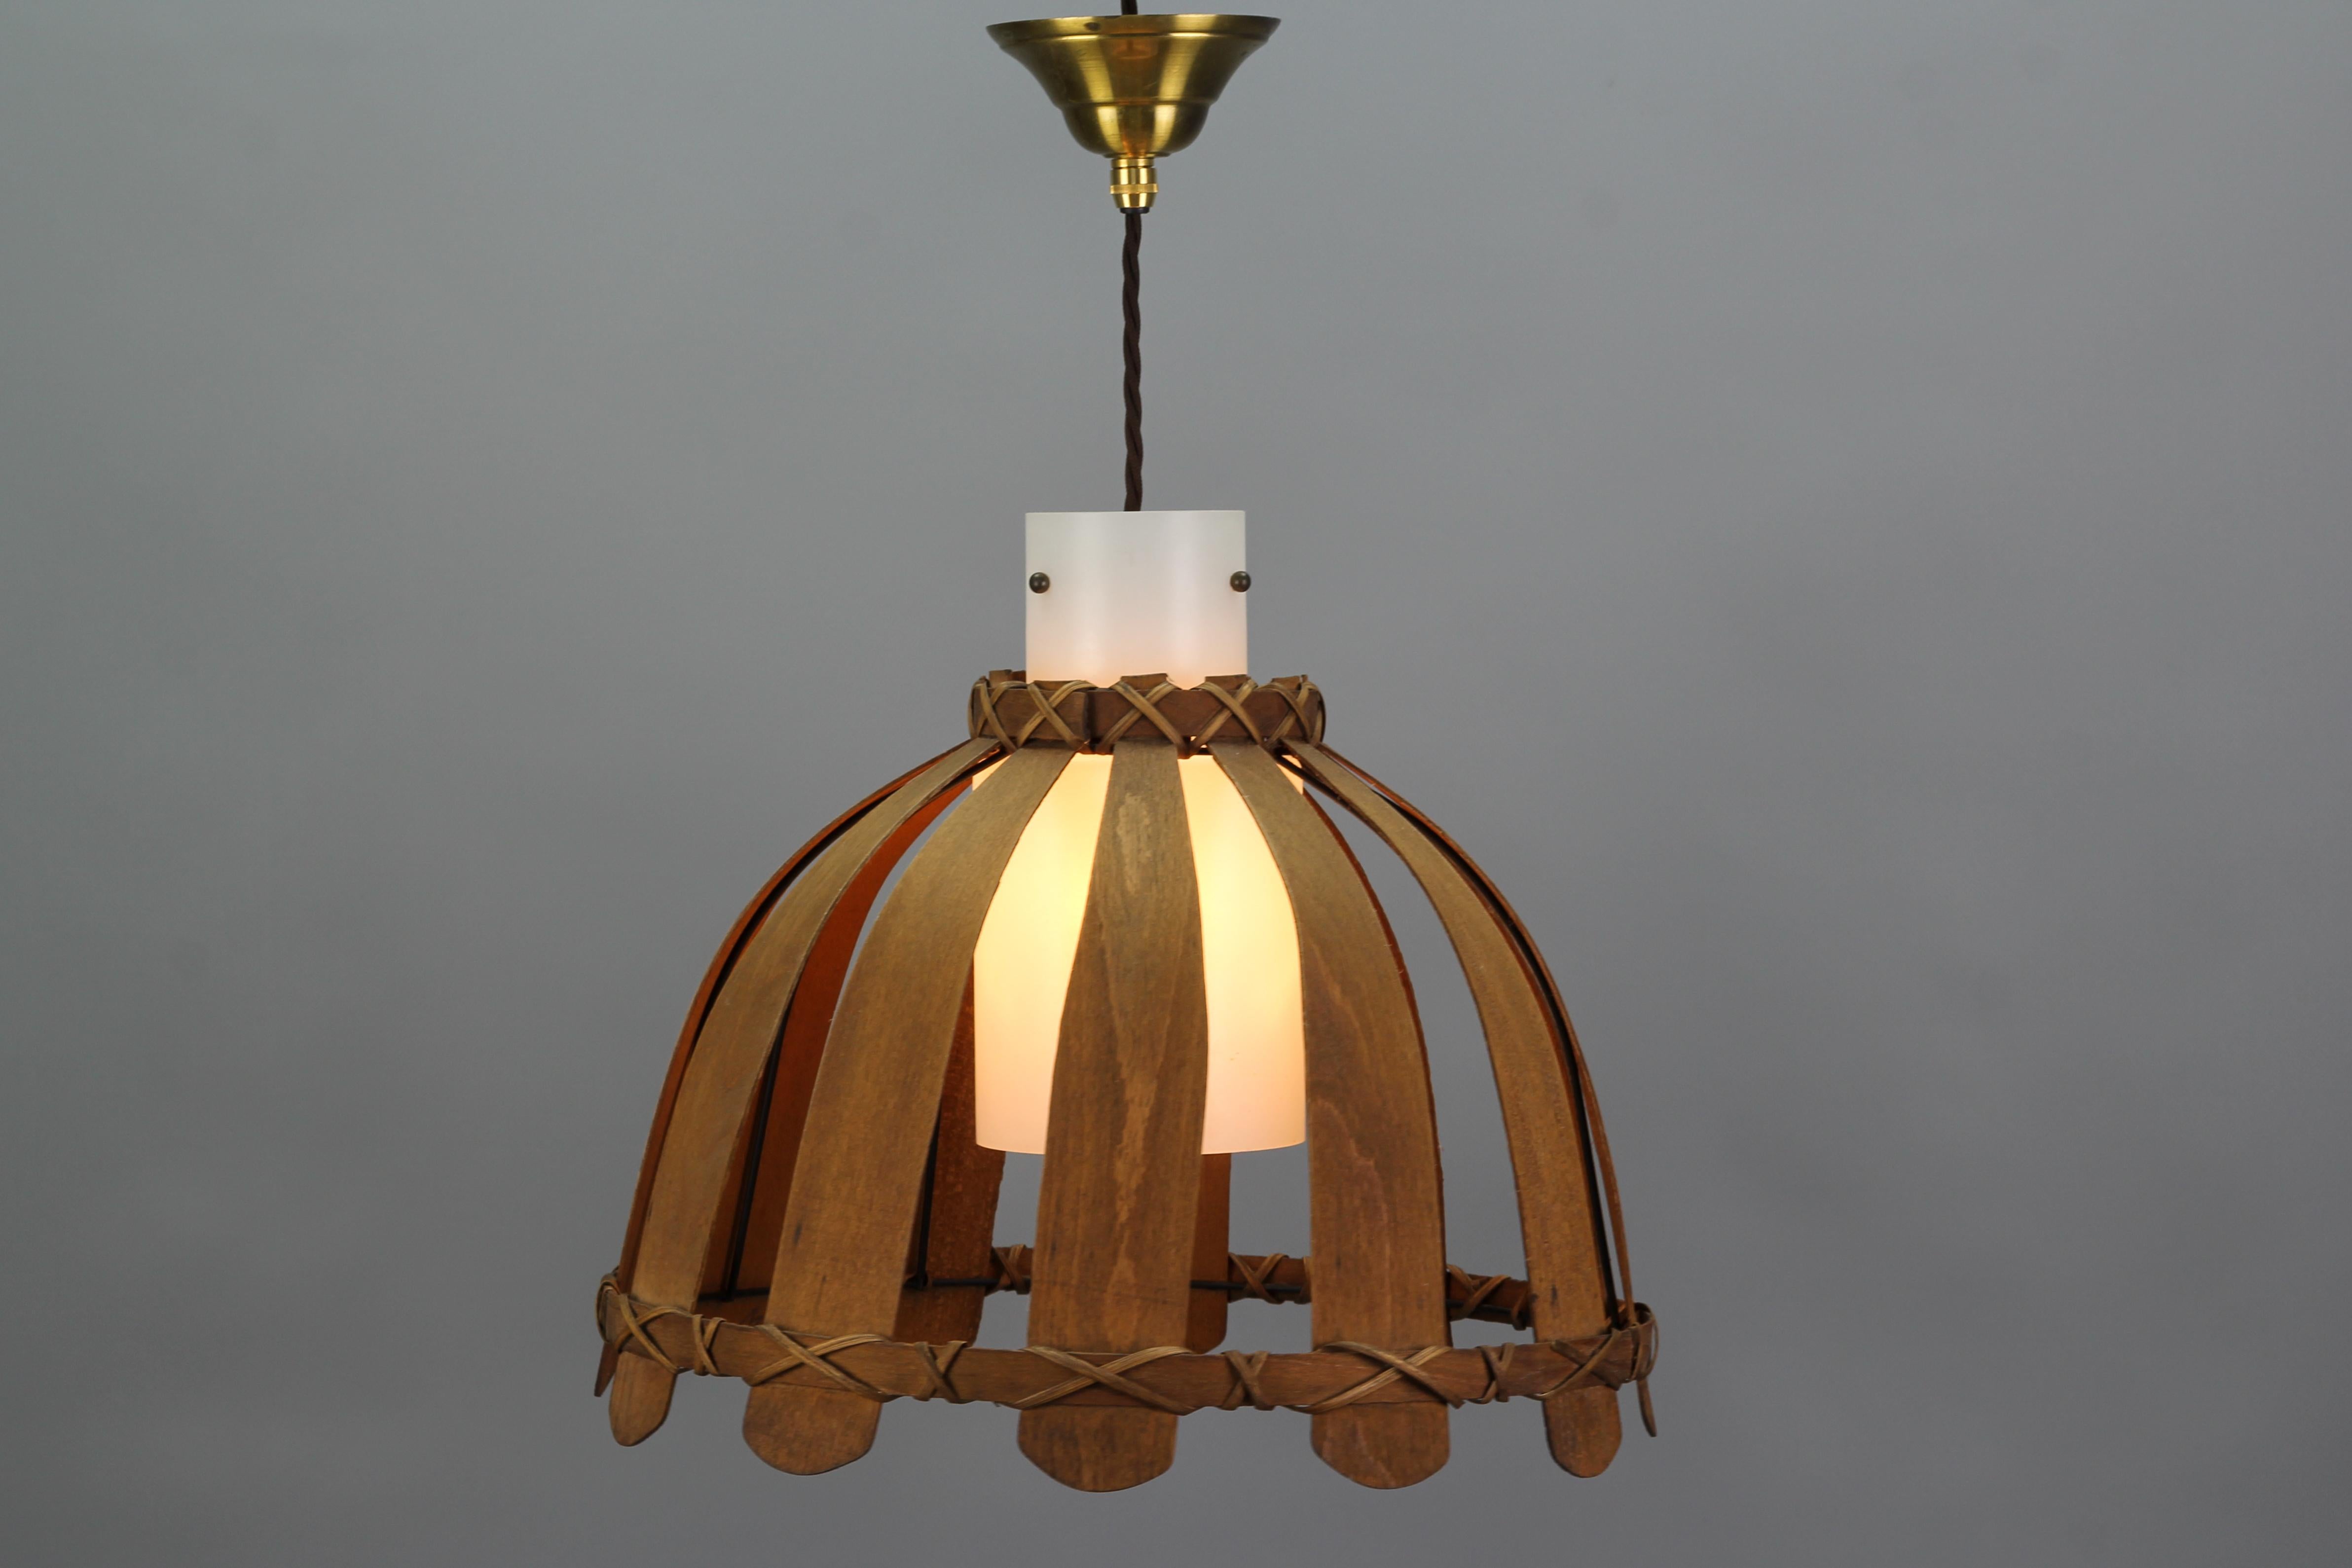 Beautiful and atmospheric vintage pendant light fixture, Germany, the 1970s. This pendant lamp features a wooden exterior and a white glass tube-shaped lampshade inside of the wooden frame. 
One new socket for E27 (E26) light bulb.
Adjustable